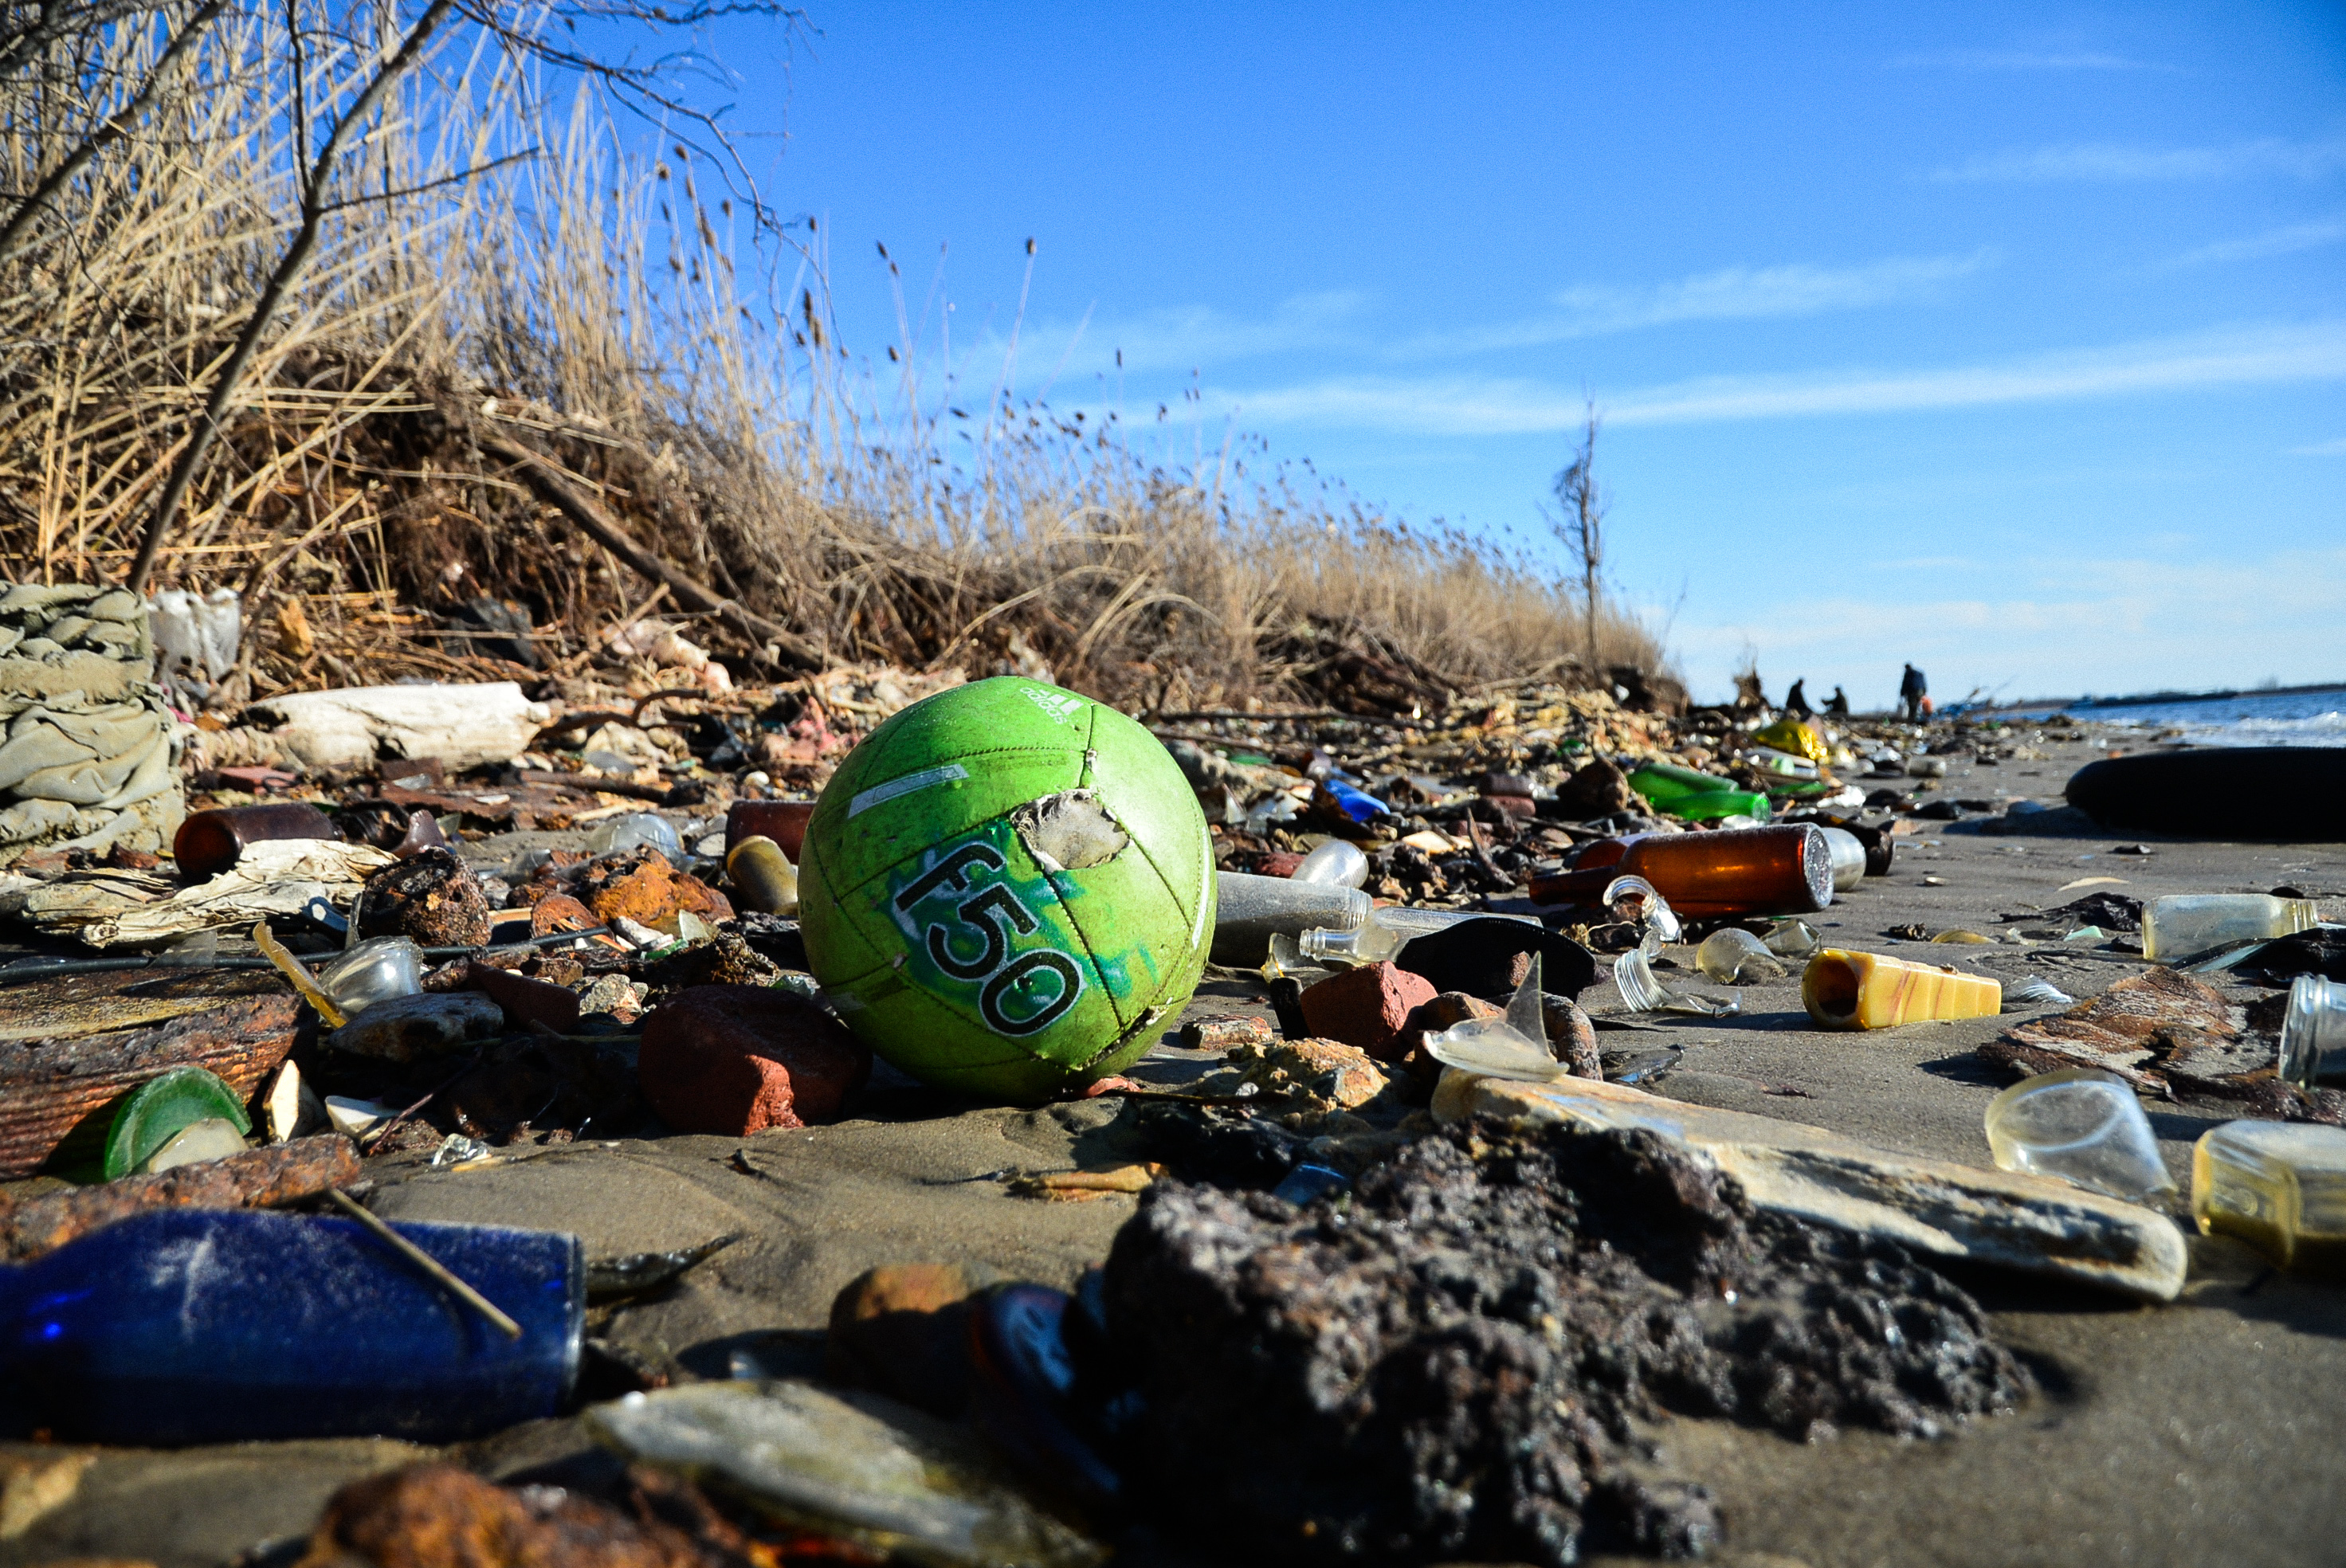 A soccer ball, broken bottles and other trash wash ashore at Dead Horse Bay. March 11, 2018. (Diana Crandall)